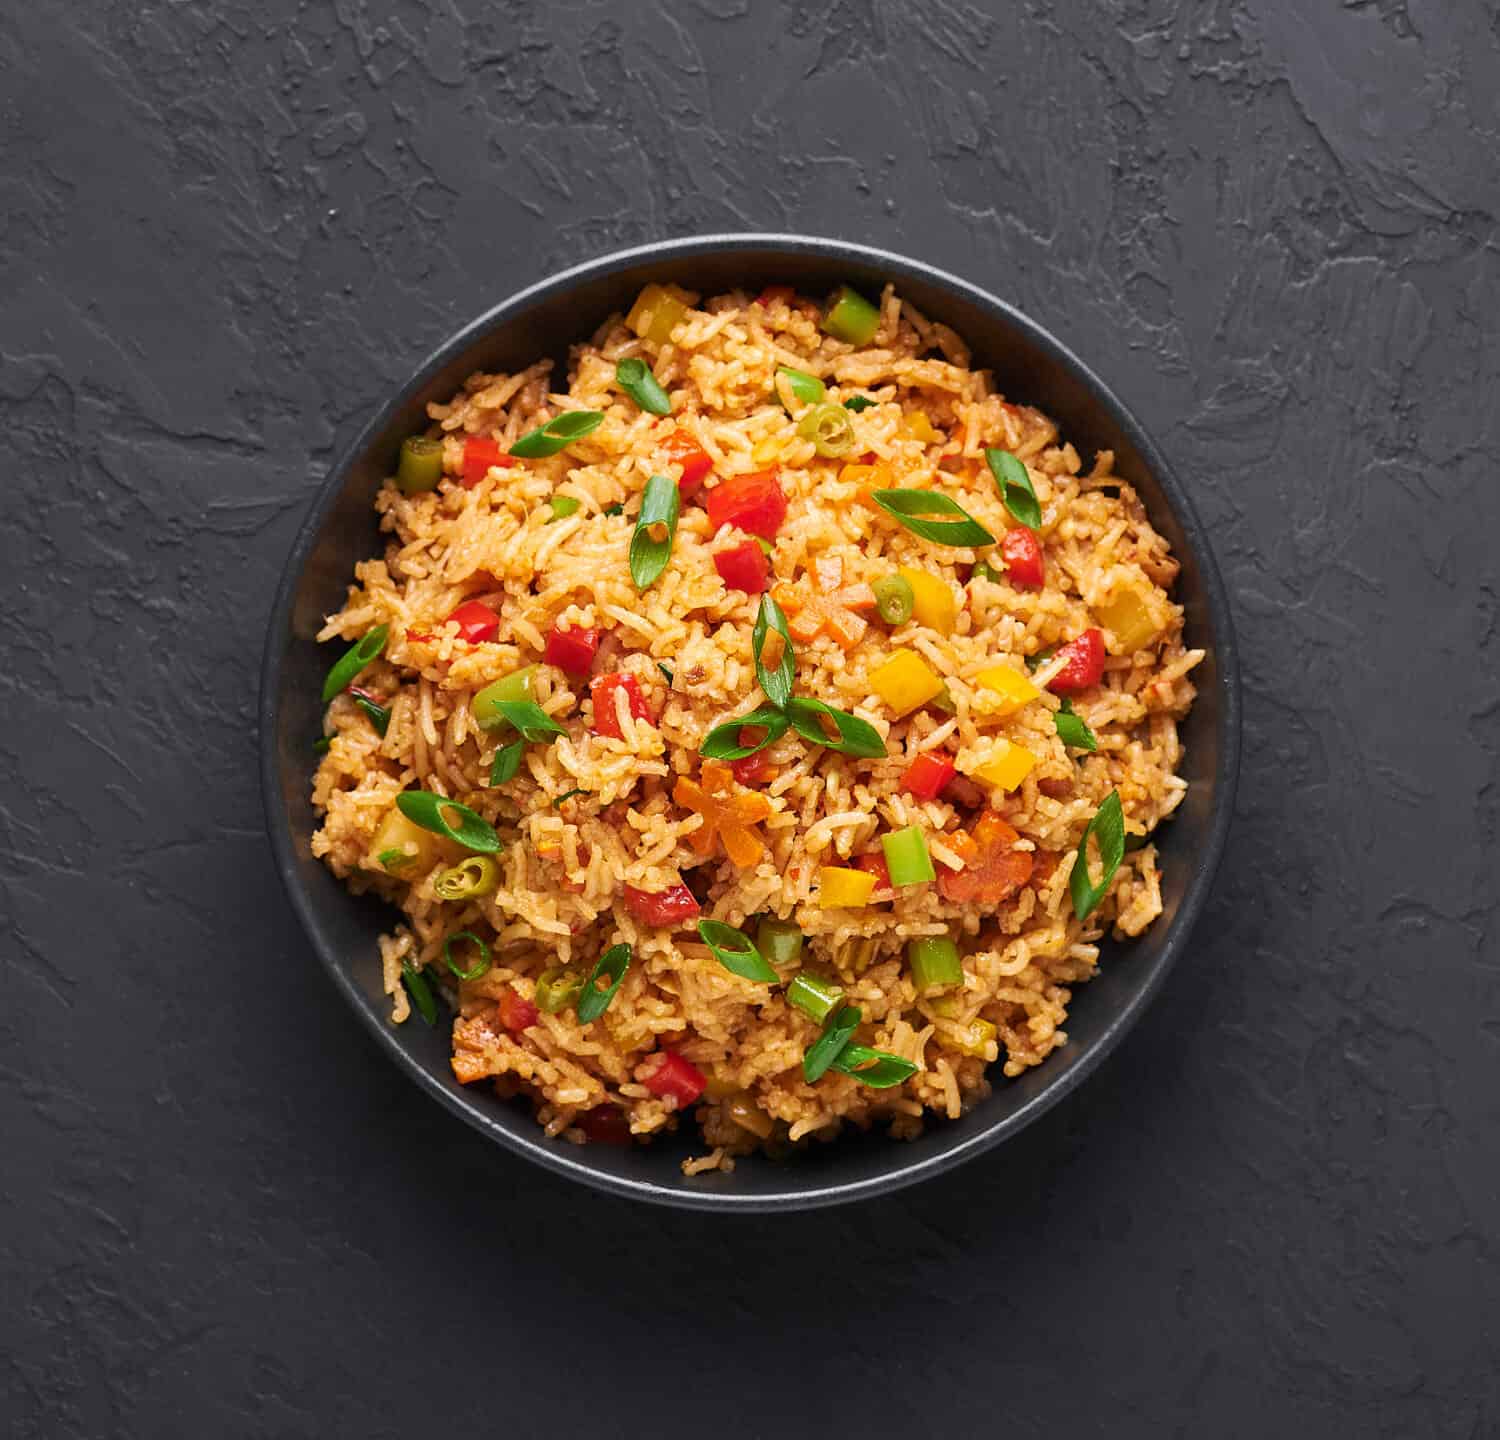 Veg Schezwan Fried Rice in black bowl at dark slate background. Vegetarian Szechuan Rice is indo-chinese cuisine dish with bell peppers, green beans, carrot. Top view